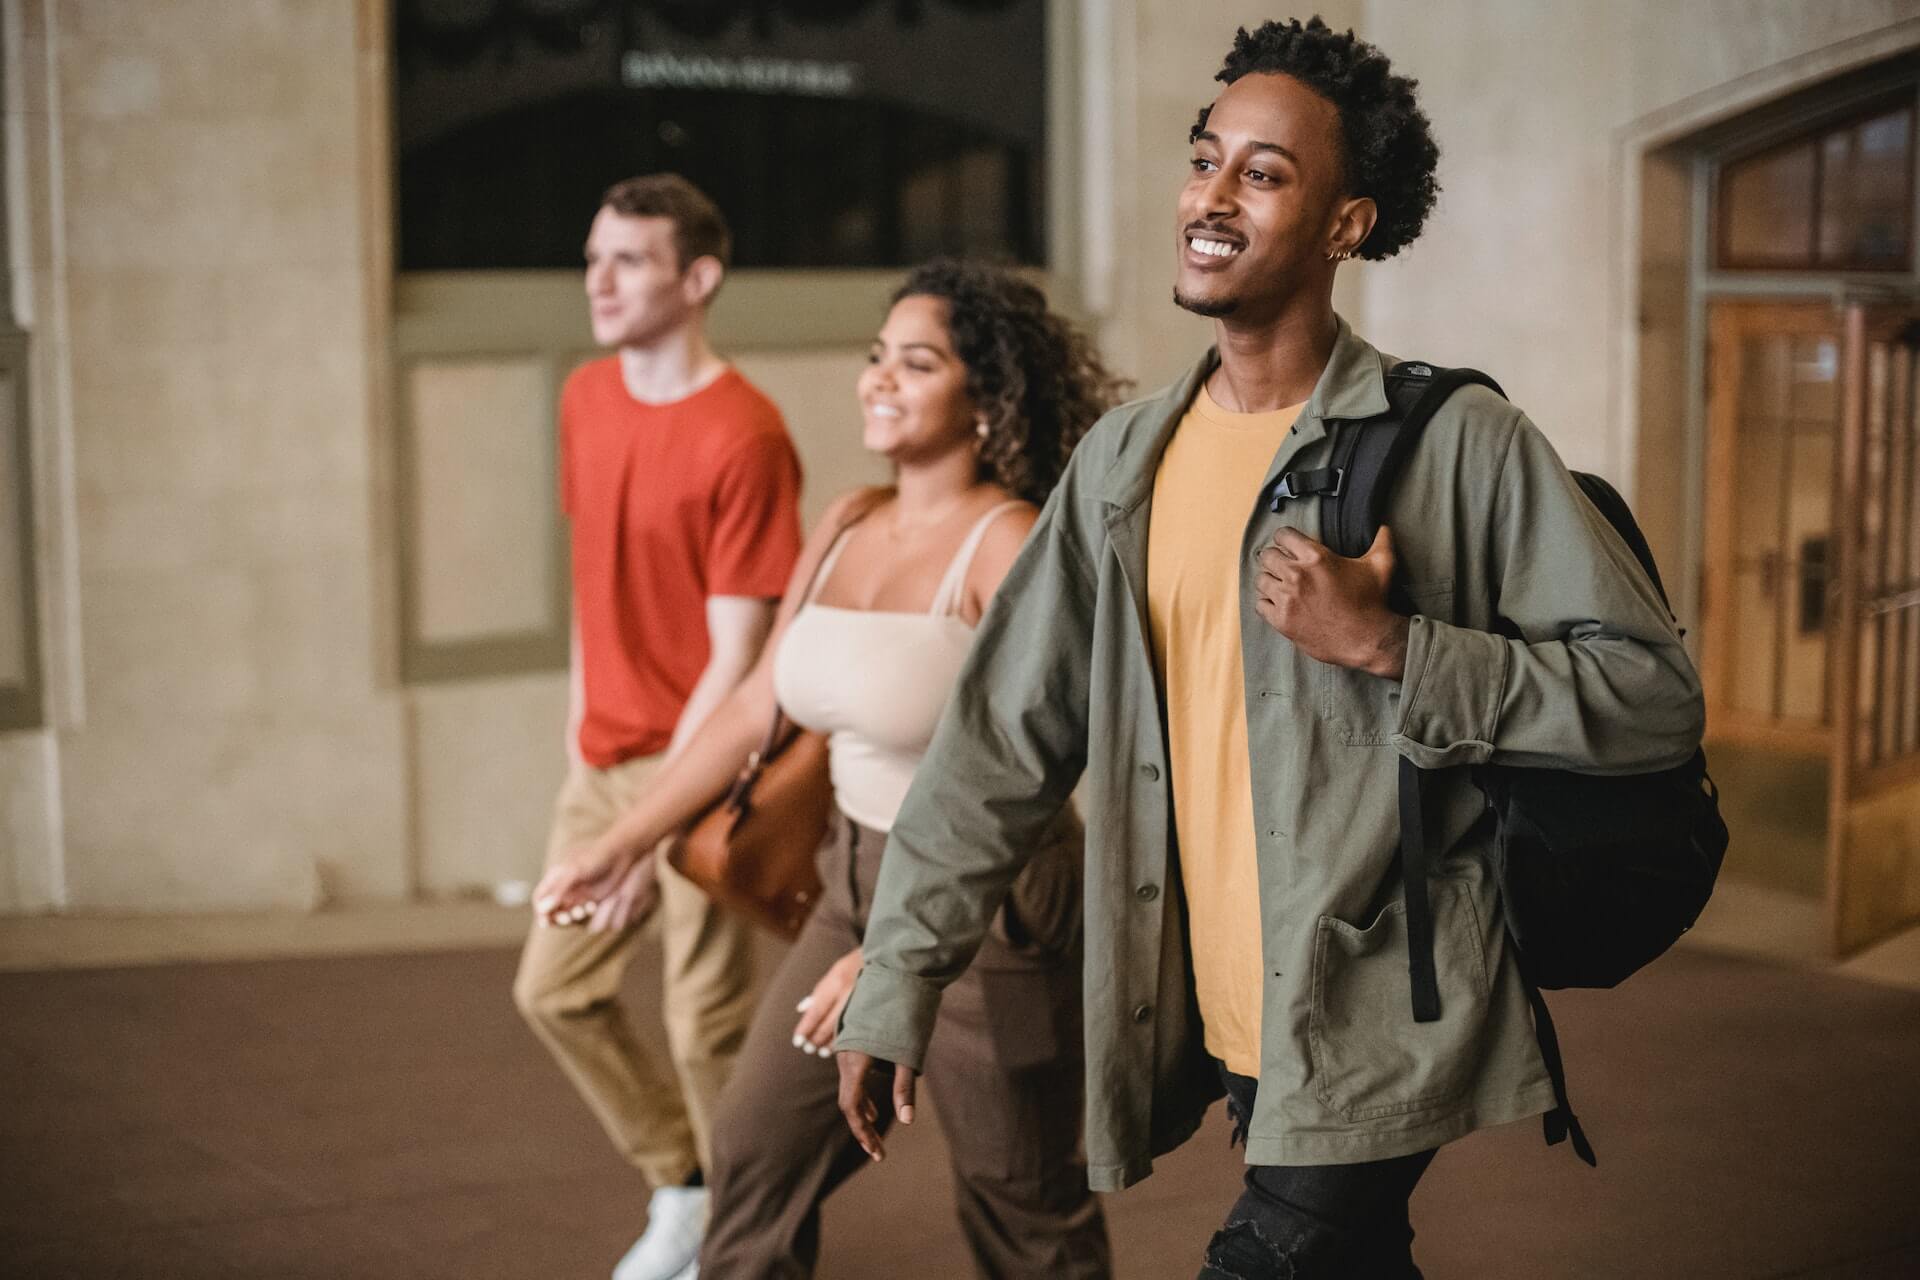 Three college students walking out of class together